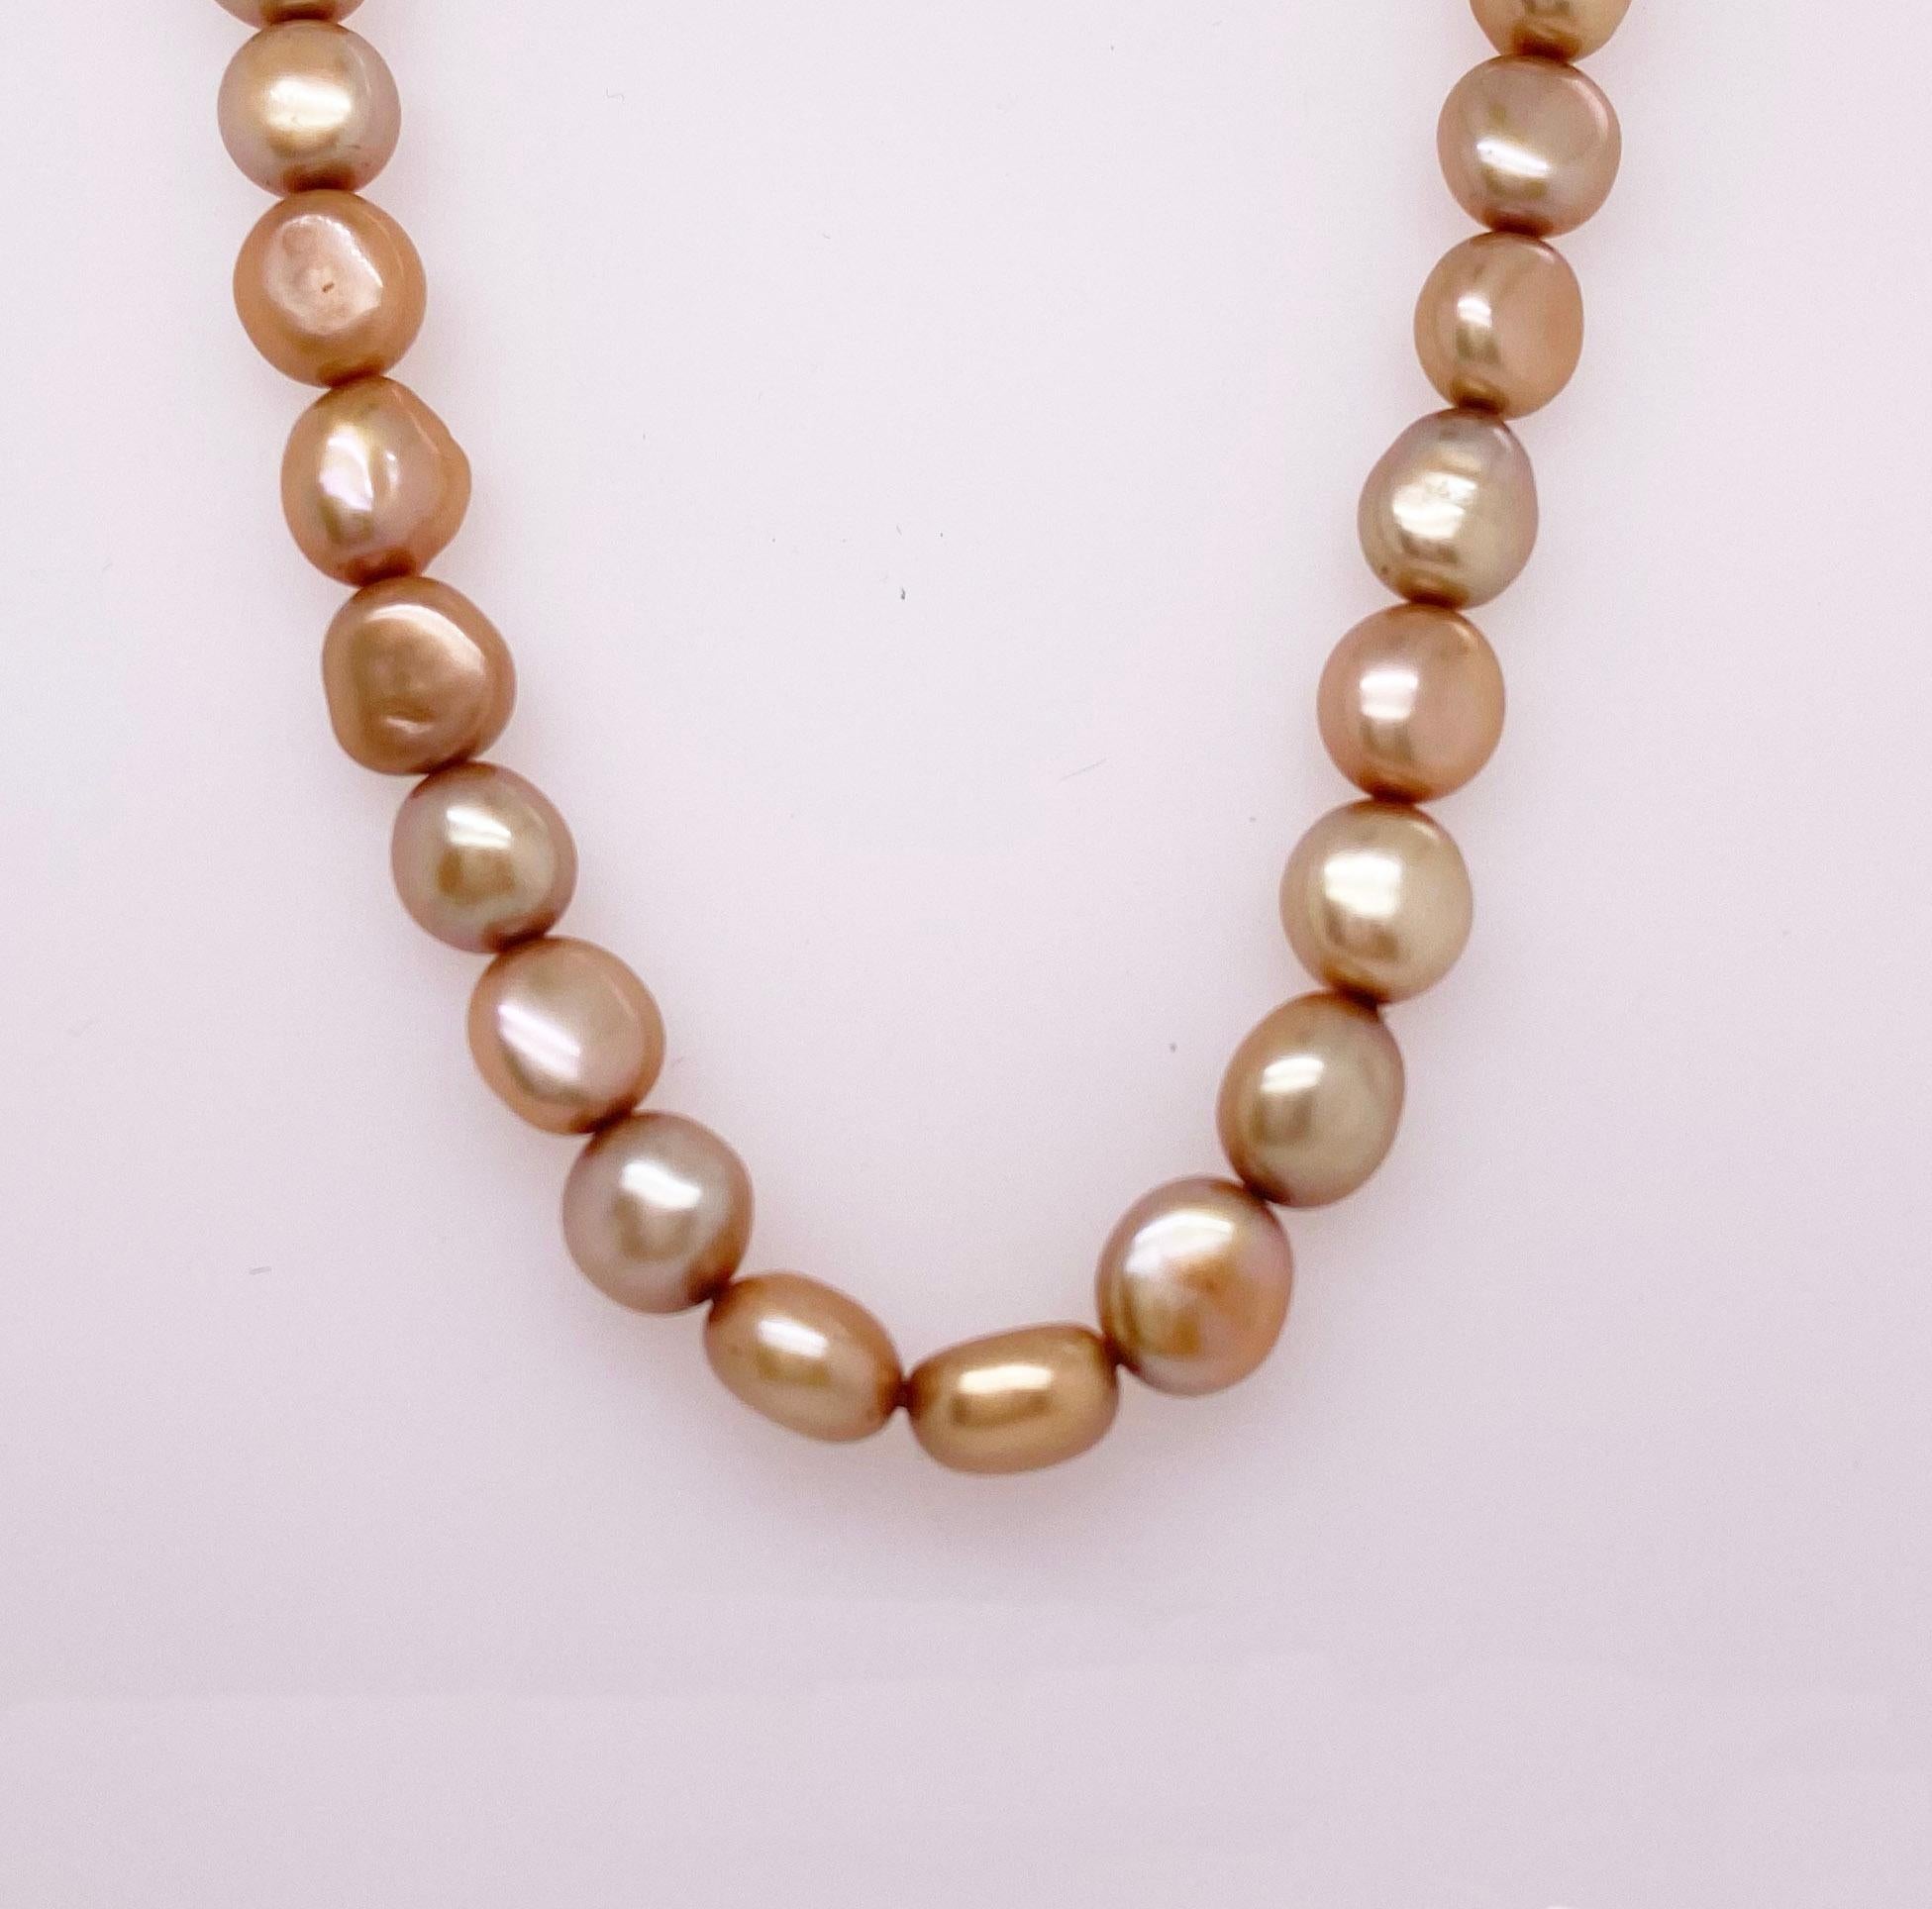 This 42 inch pearl necklace is perfect to sling around your neck as many times as you want! Stylish and fashionable, you will feel great while wearing these pearls. The pearls have a gold to brownish color. The details for this beautiful necklace